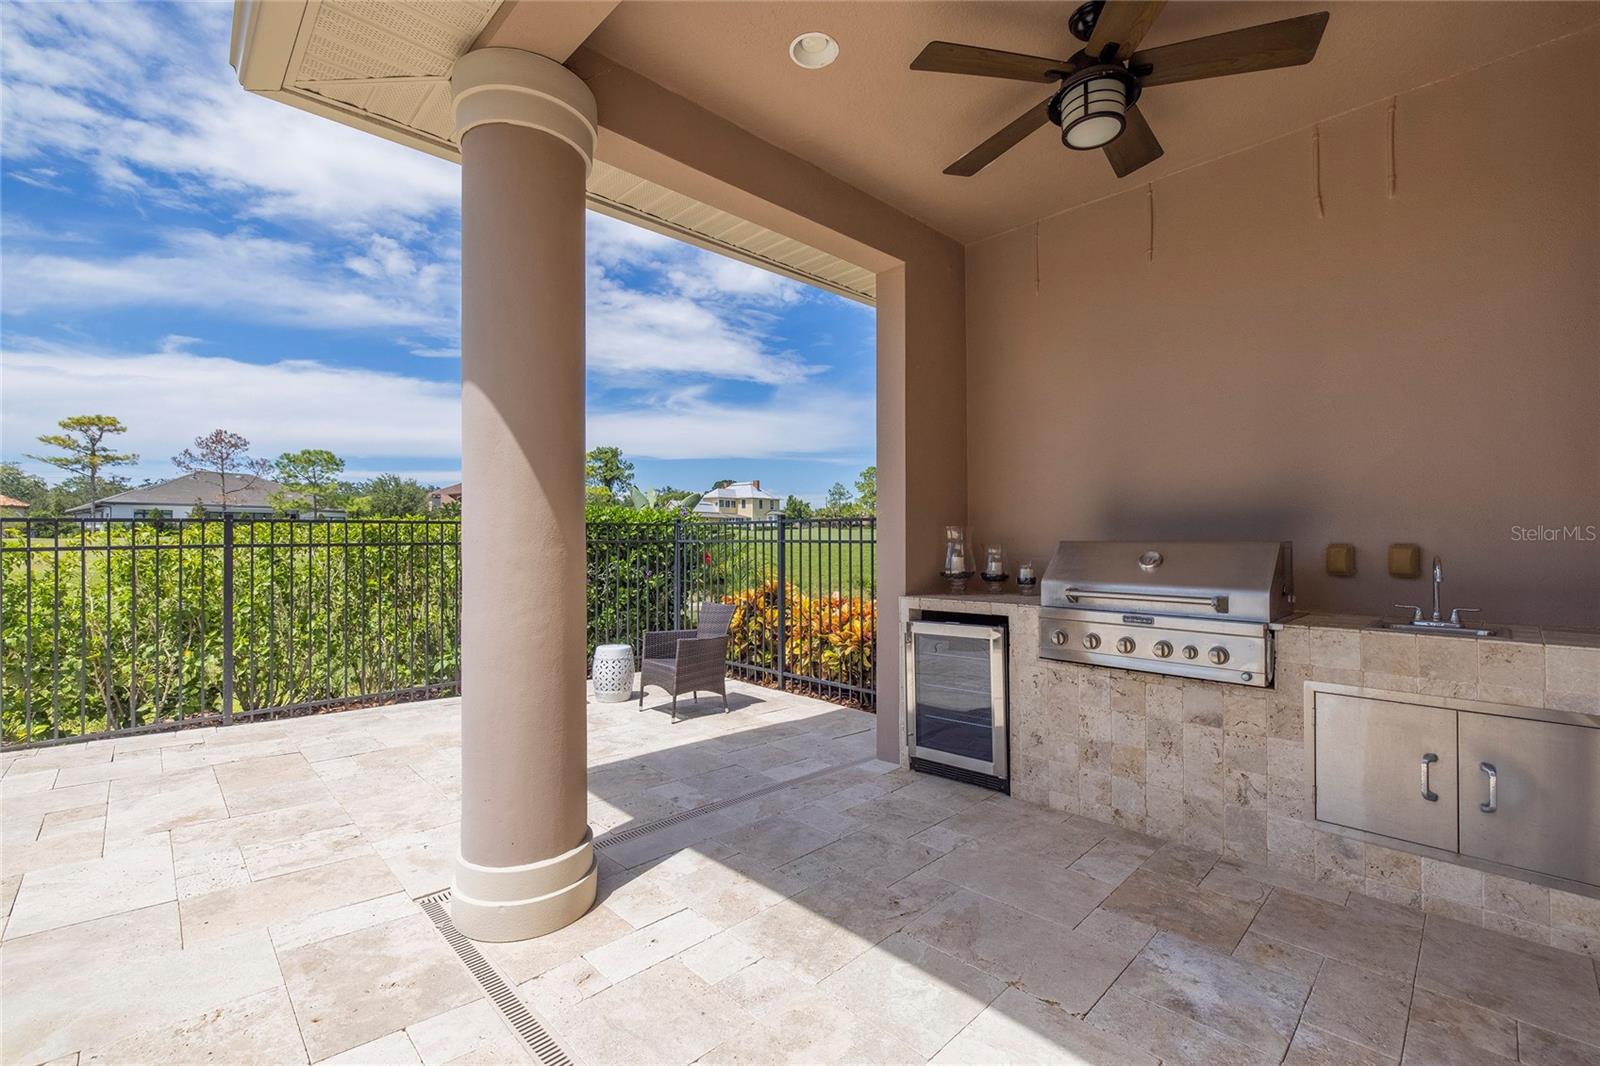 Outdoor kitchen with new beverage refrigerator and new gas grill.